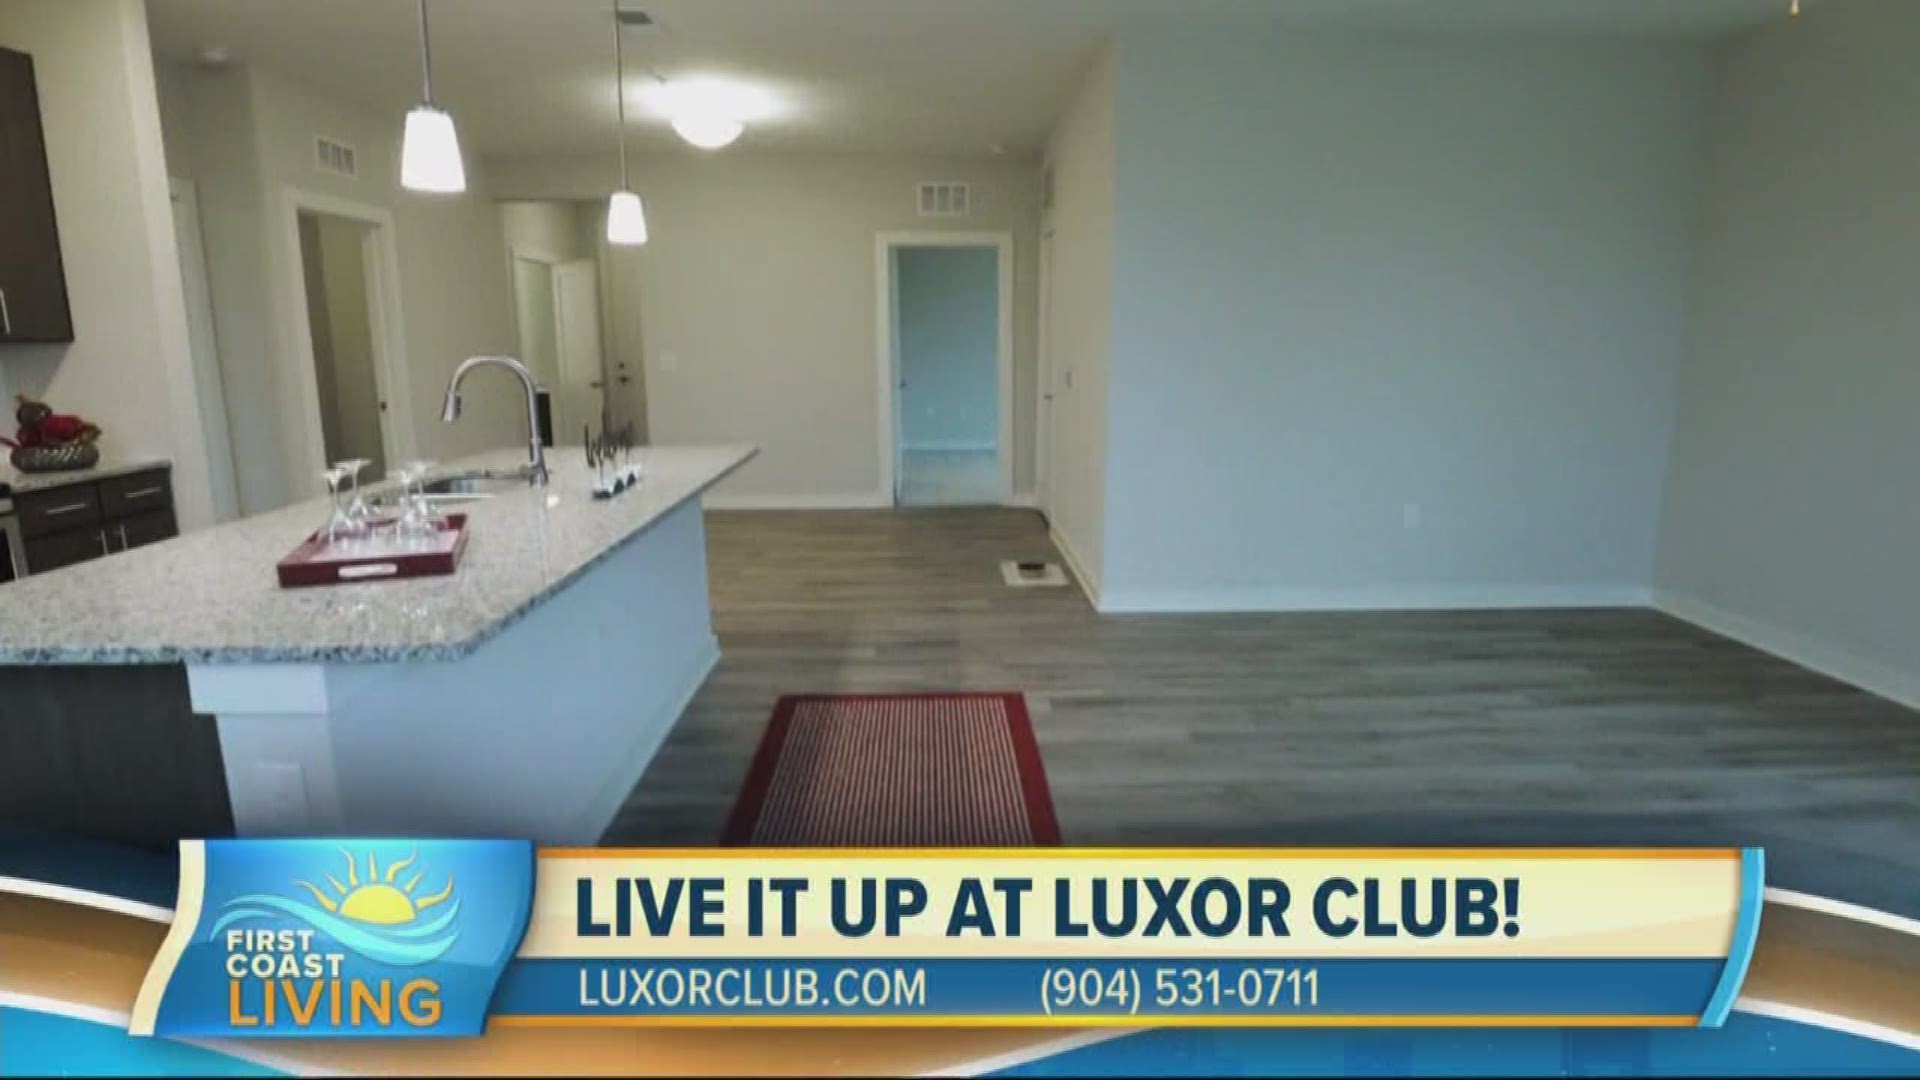 See an apartment unit at Luxor Club up close!